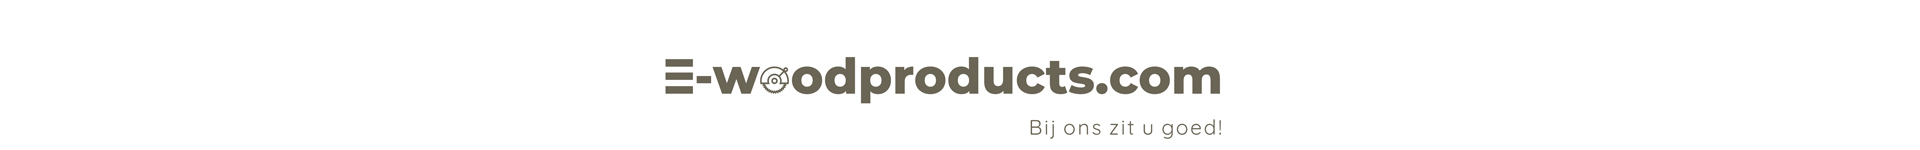 E-woodproducts.coms achtergrond